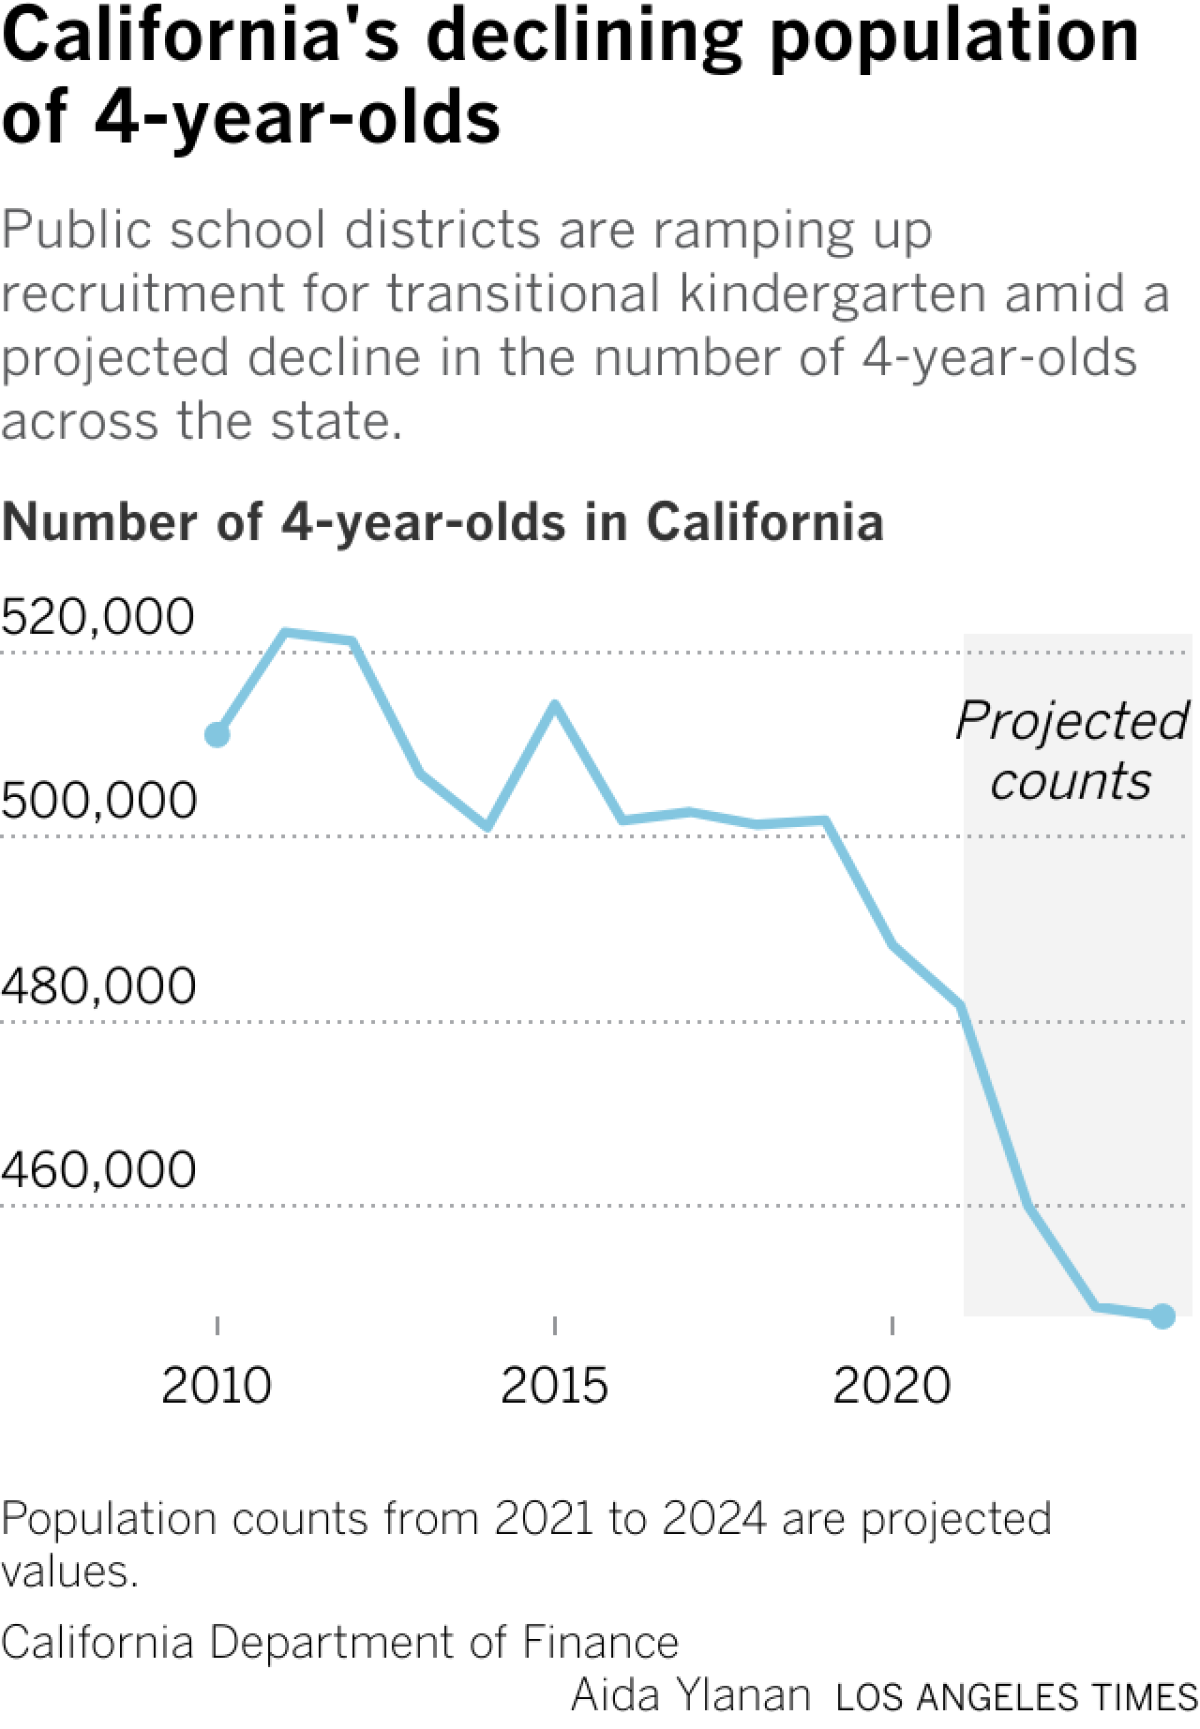 Public school districts are ramping up recruitment for transitional kindergarten amid a projected decline in the number of 4-year-olds across the state.